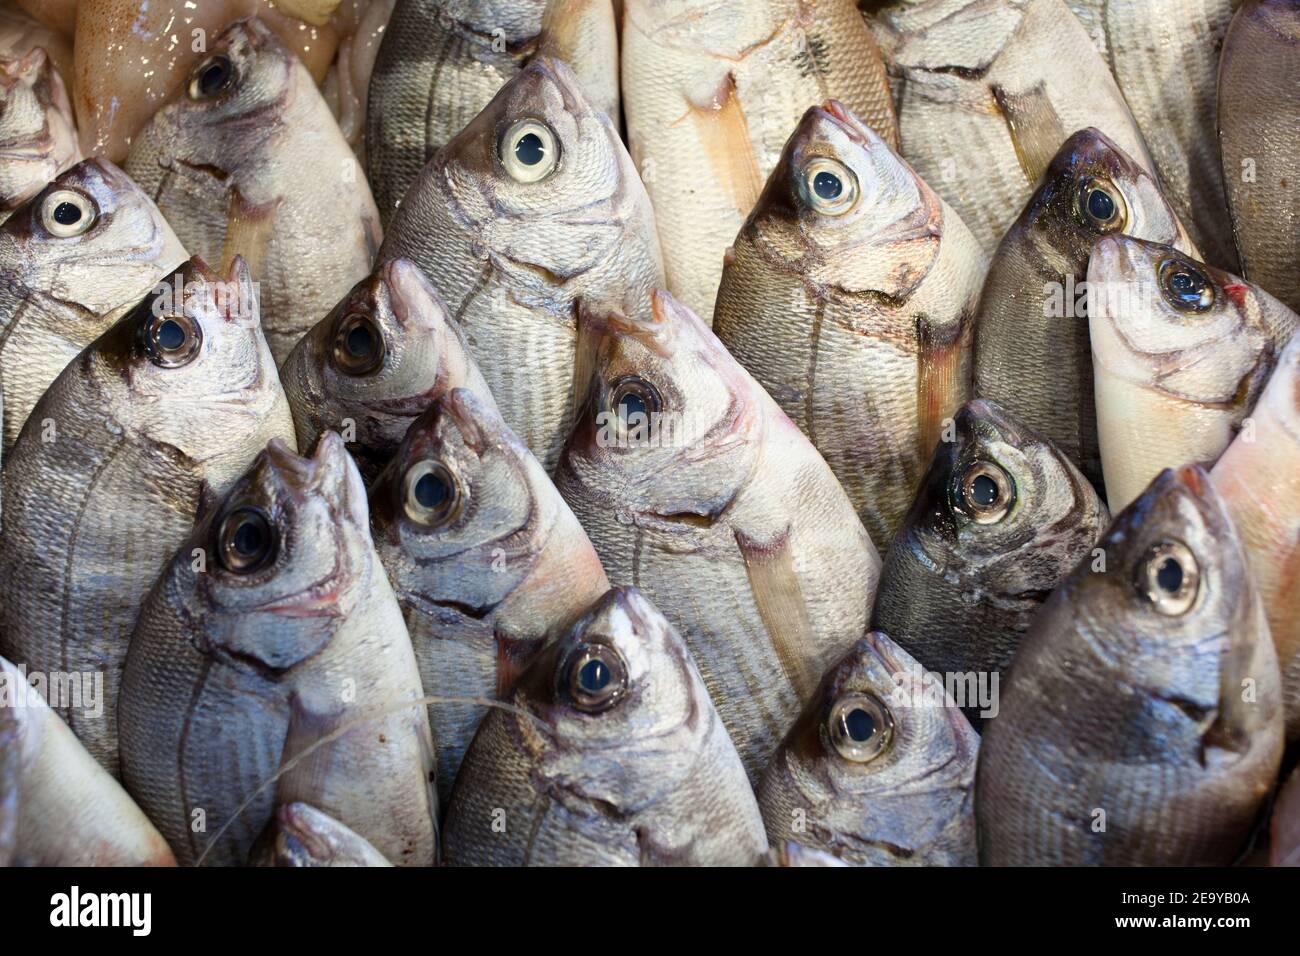 A scene from a fish market with many fresh fish laid out on a tray with mouth open. Stock Photo